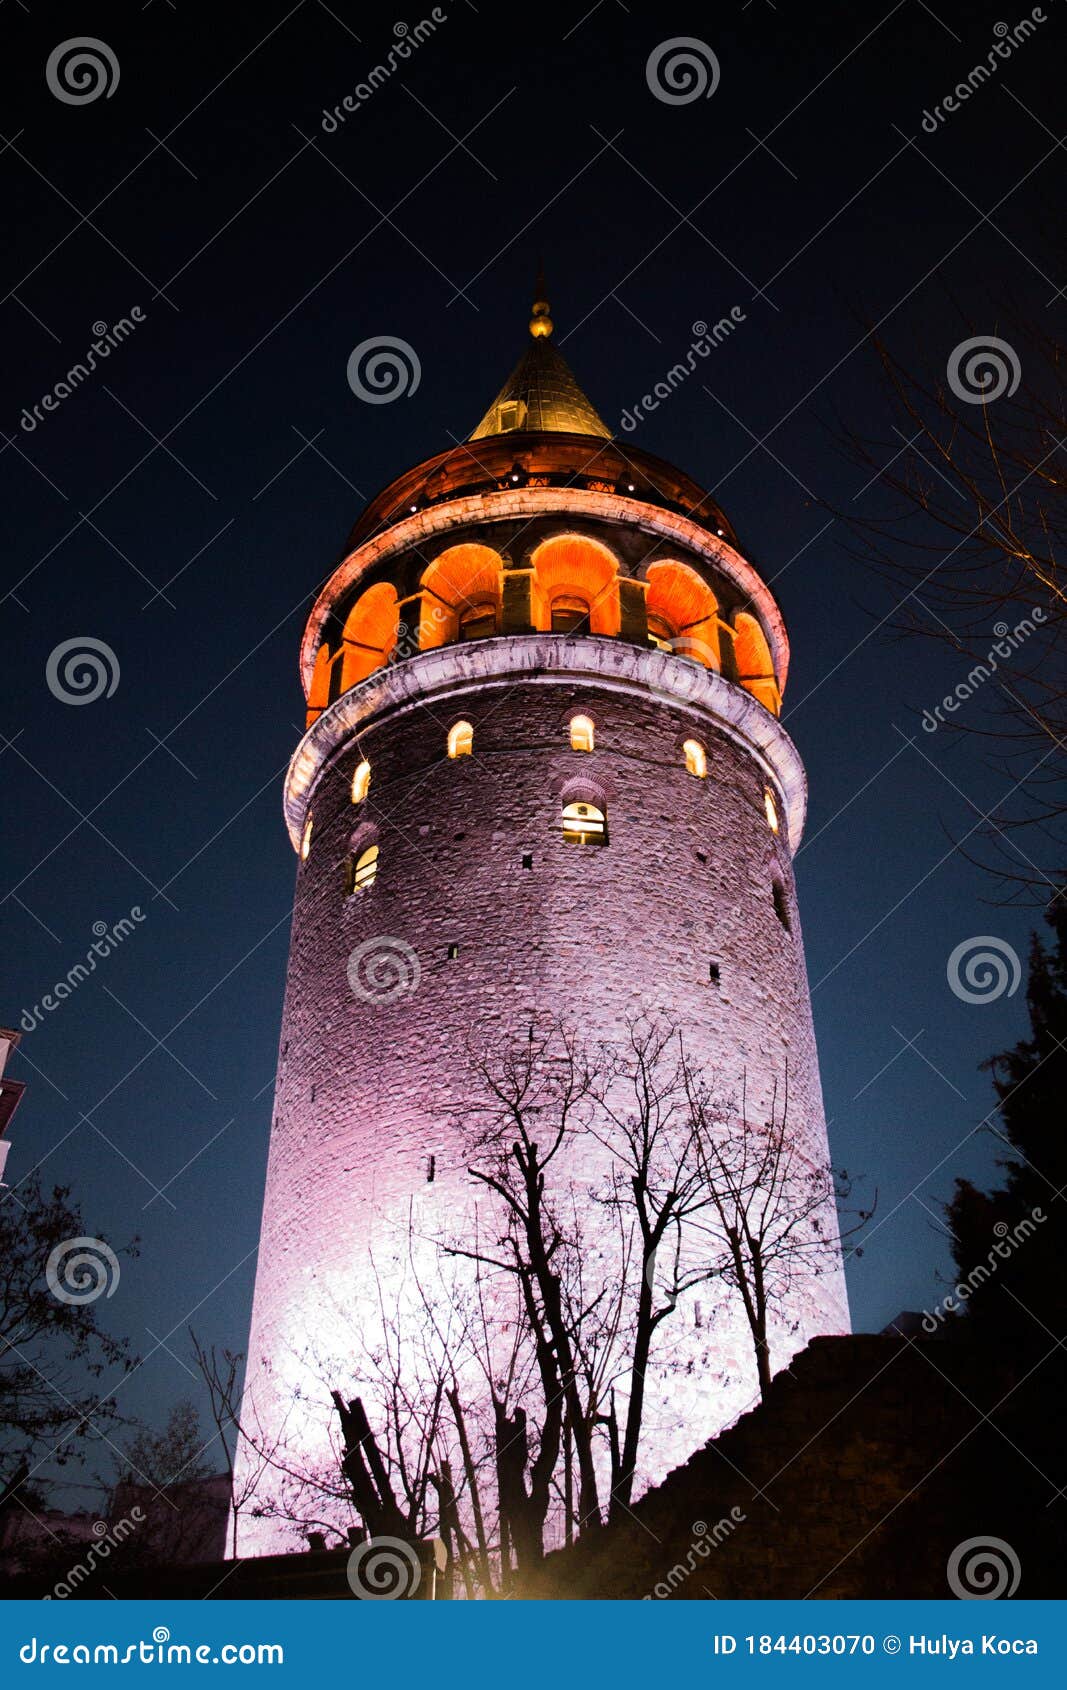 galata tower from byzantium times in istanbul